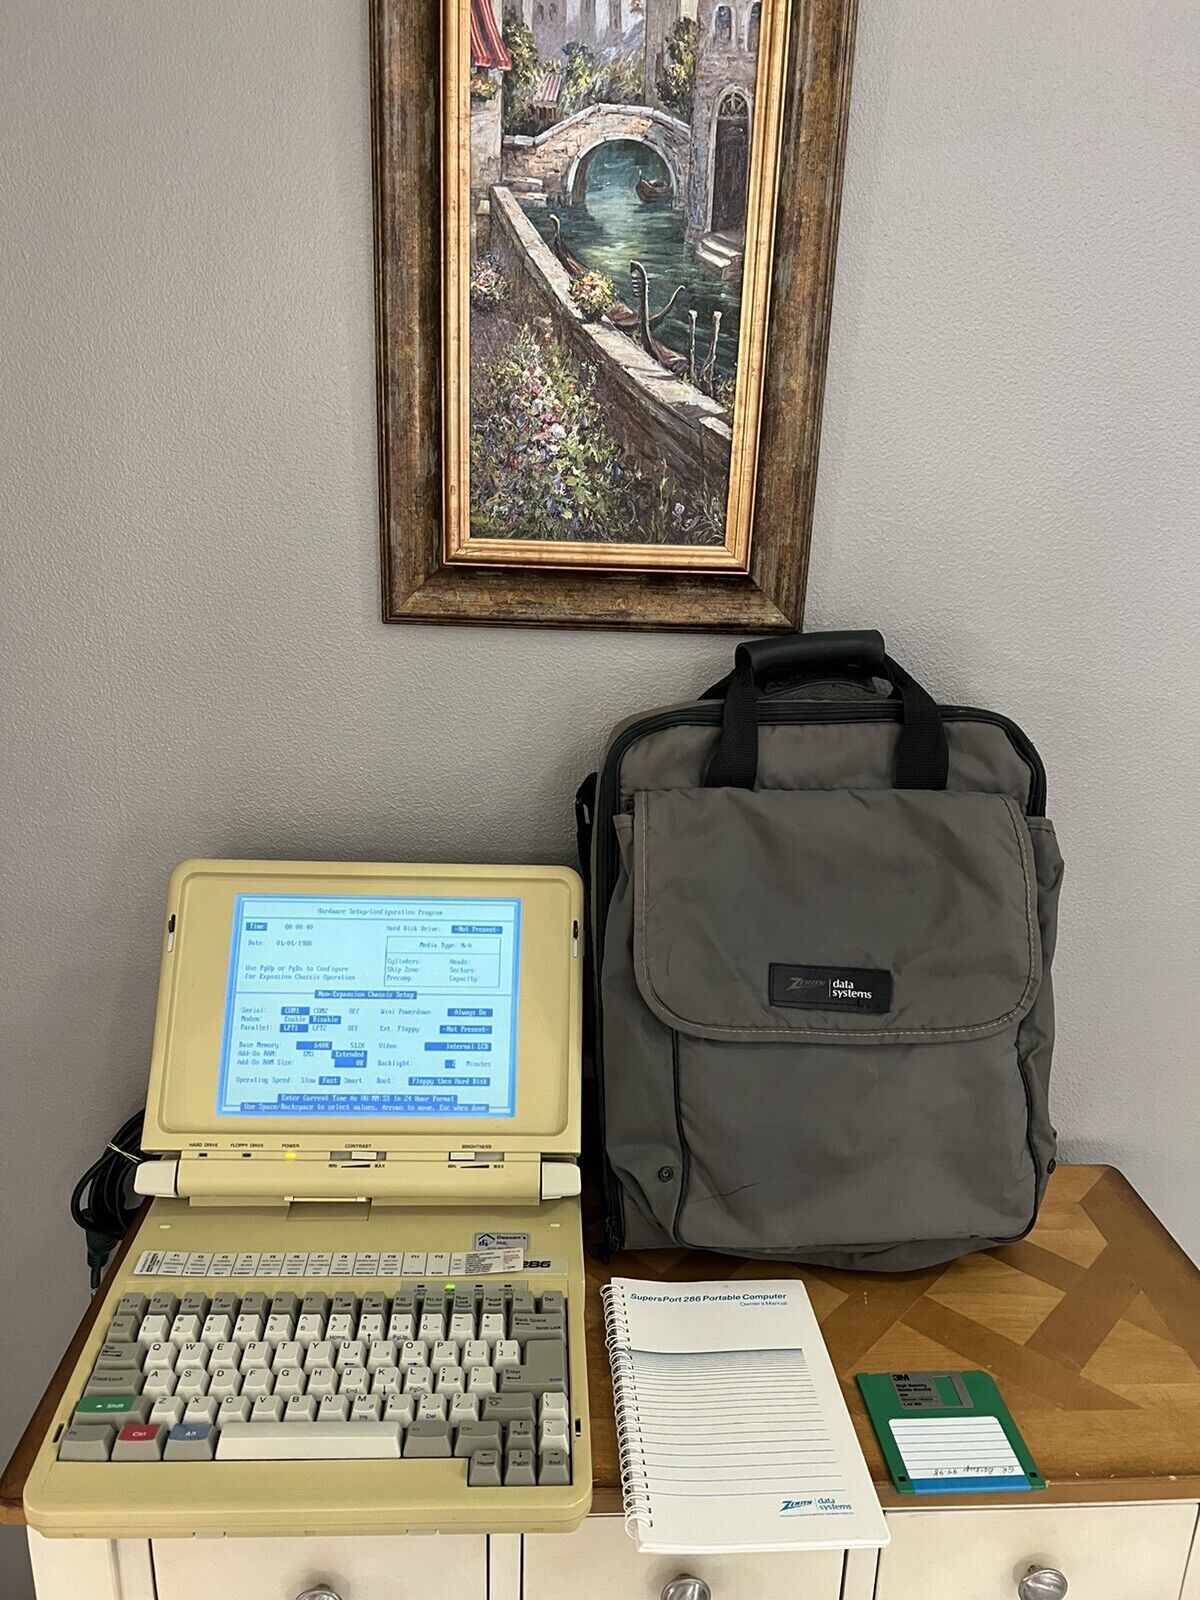 VINTAGE Zenith Data Systems SuperSport 286 portable computer. W/ extras.. Tested